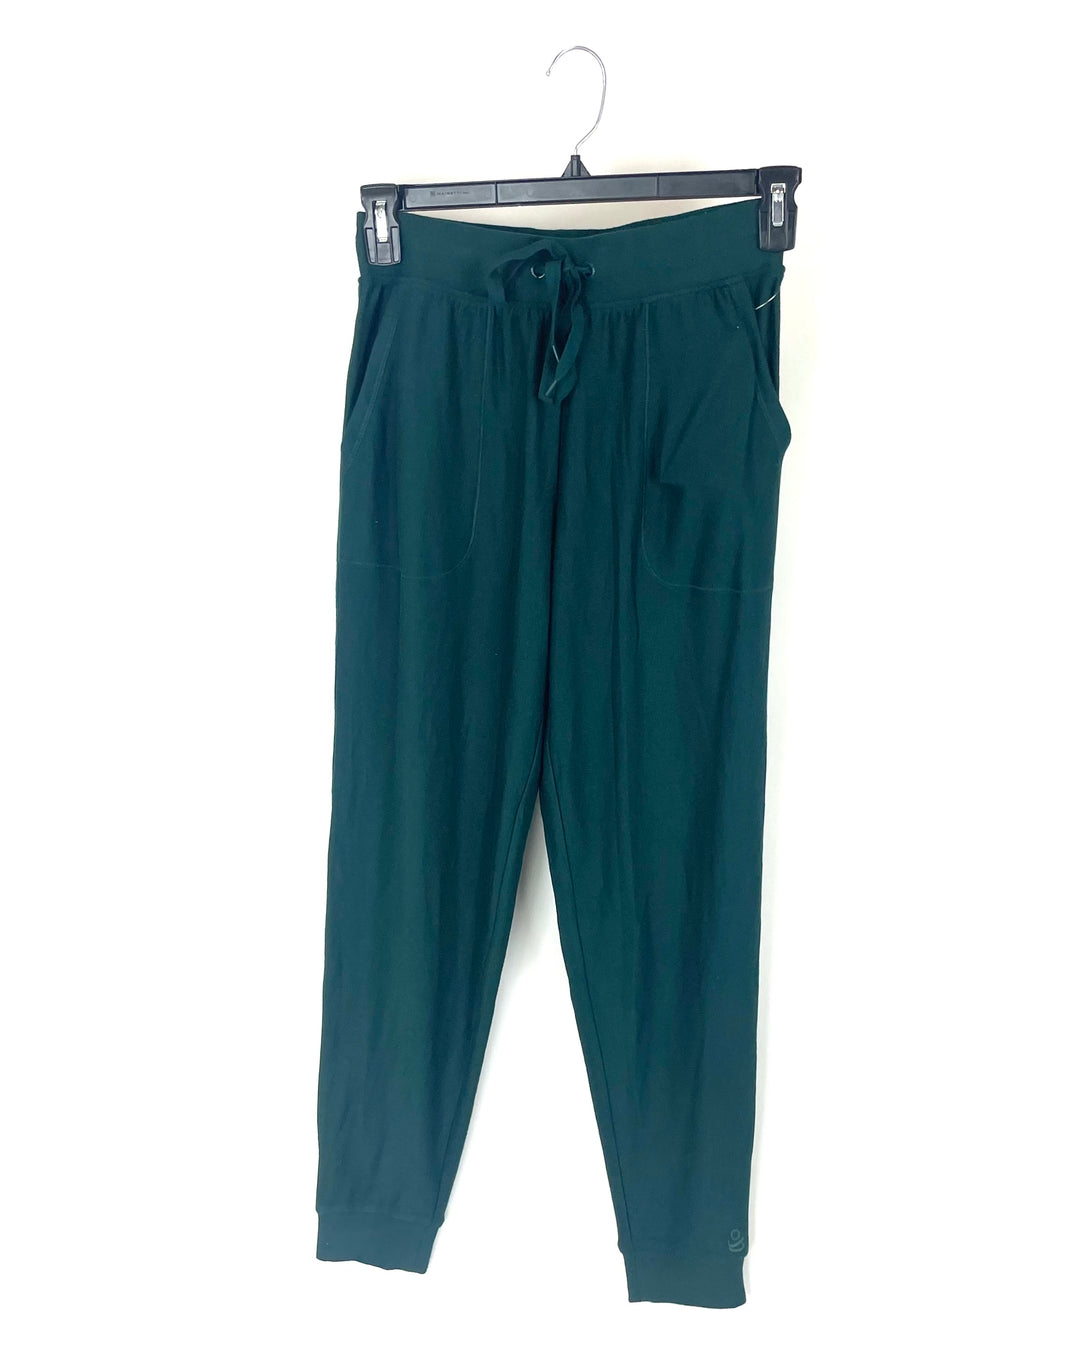 Extra Soft Teal Joggers - Size 2-4